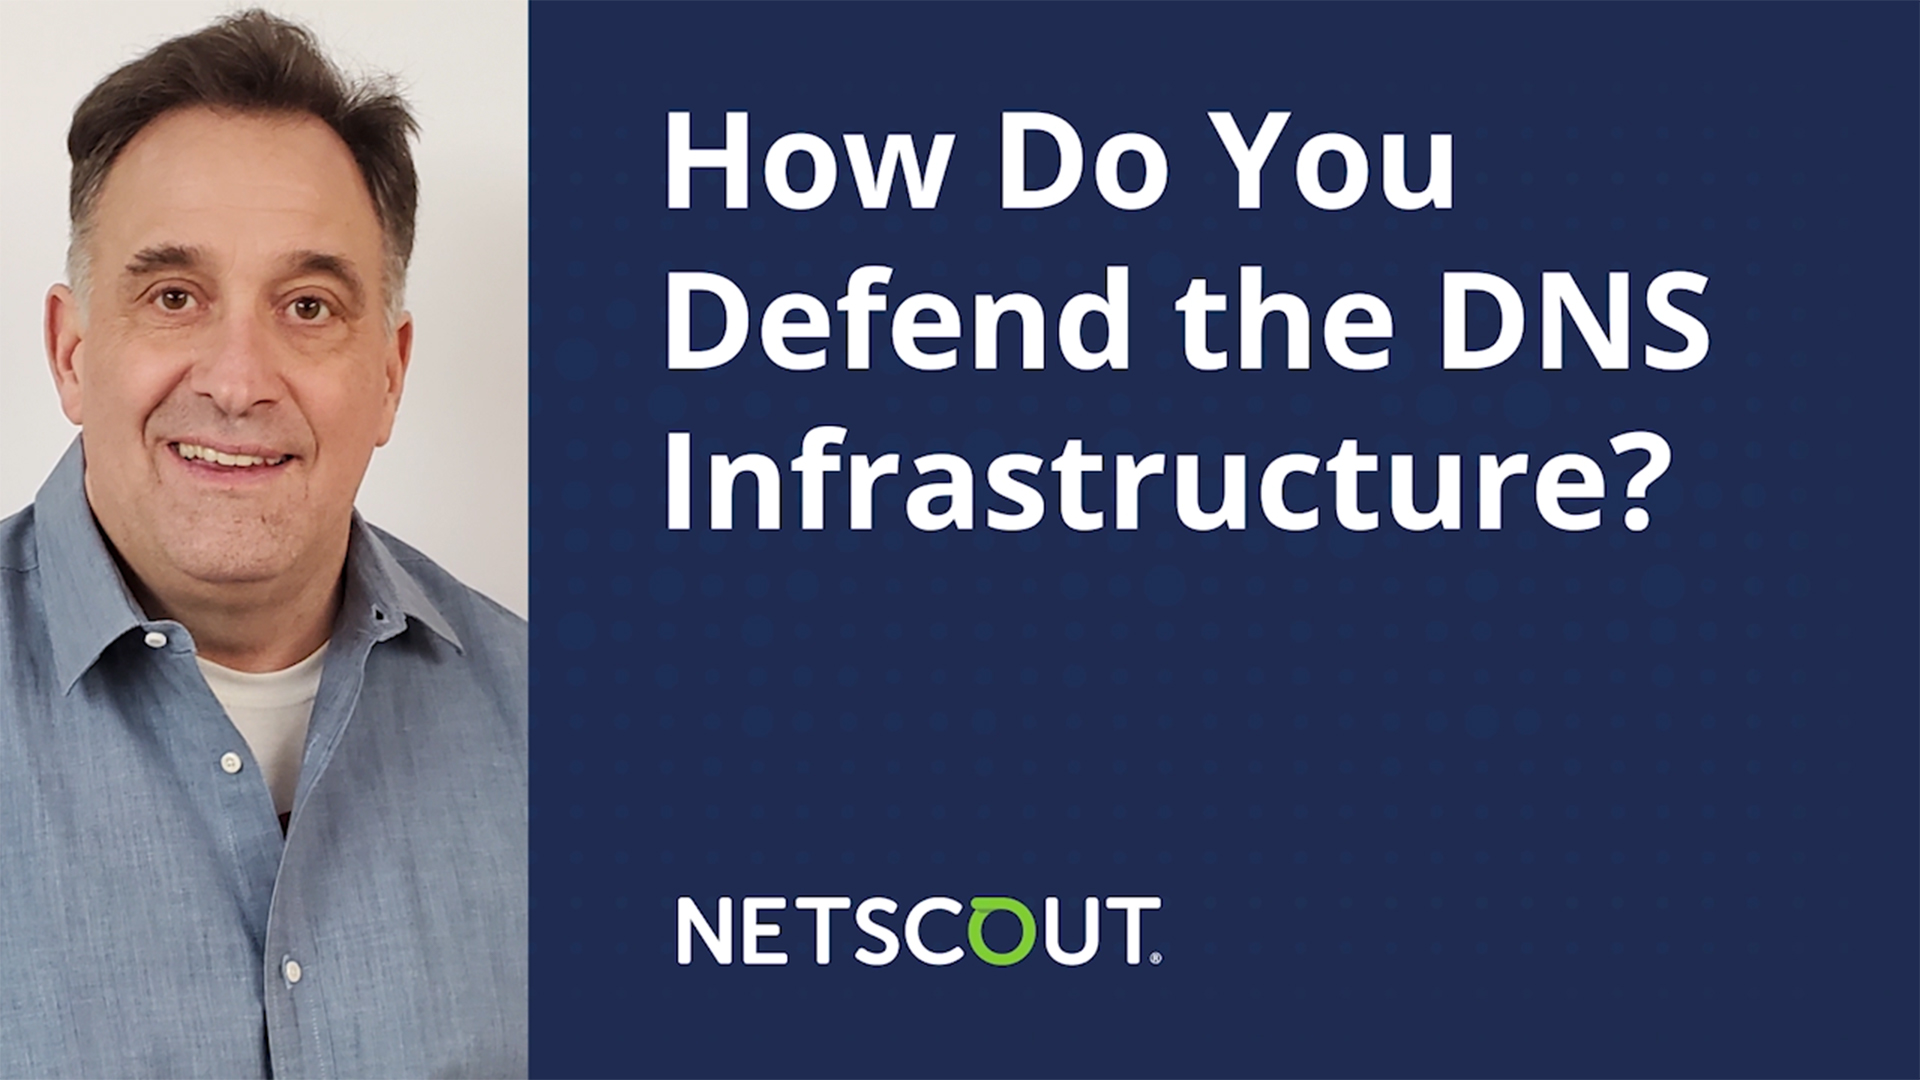 How Do You Defend the DNS Infrastructure?